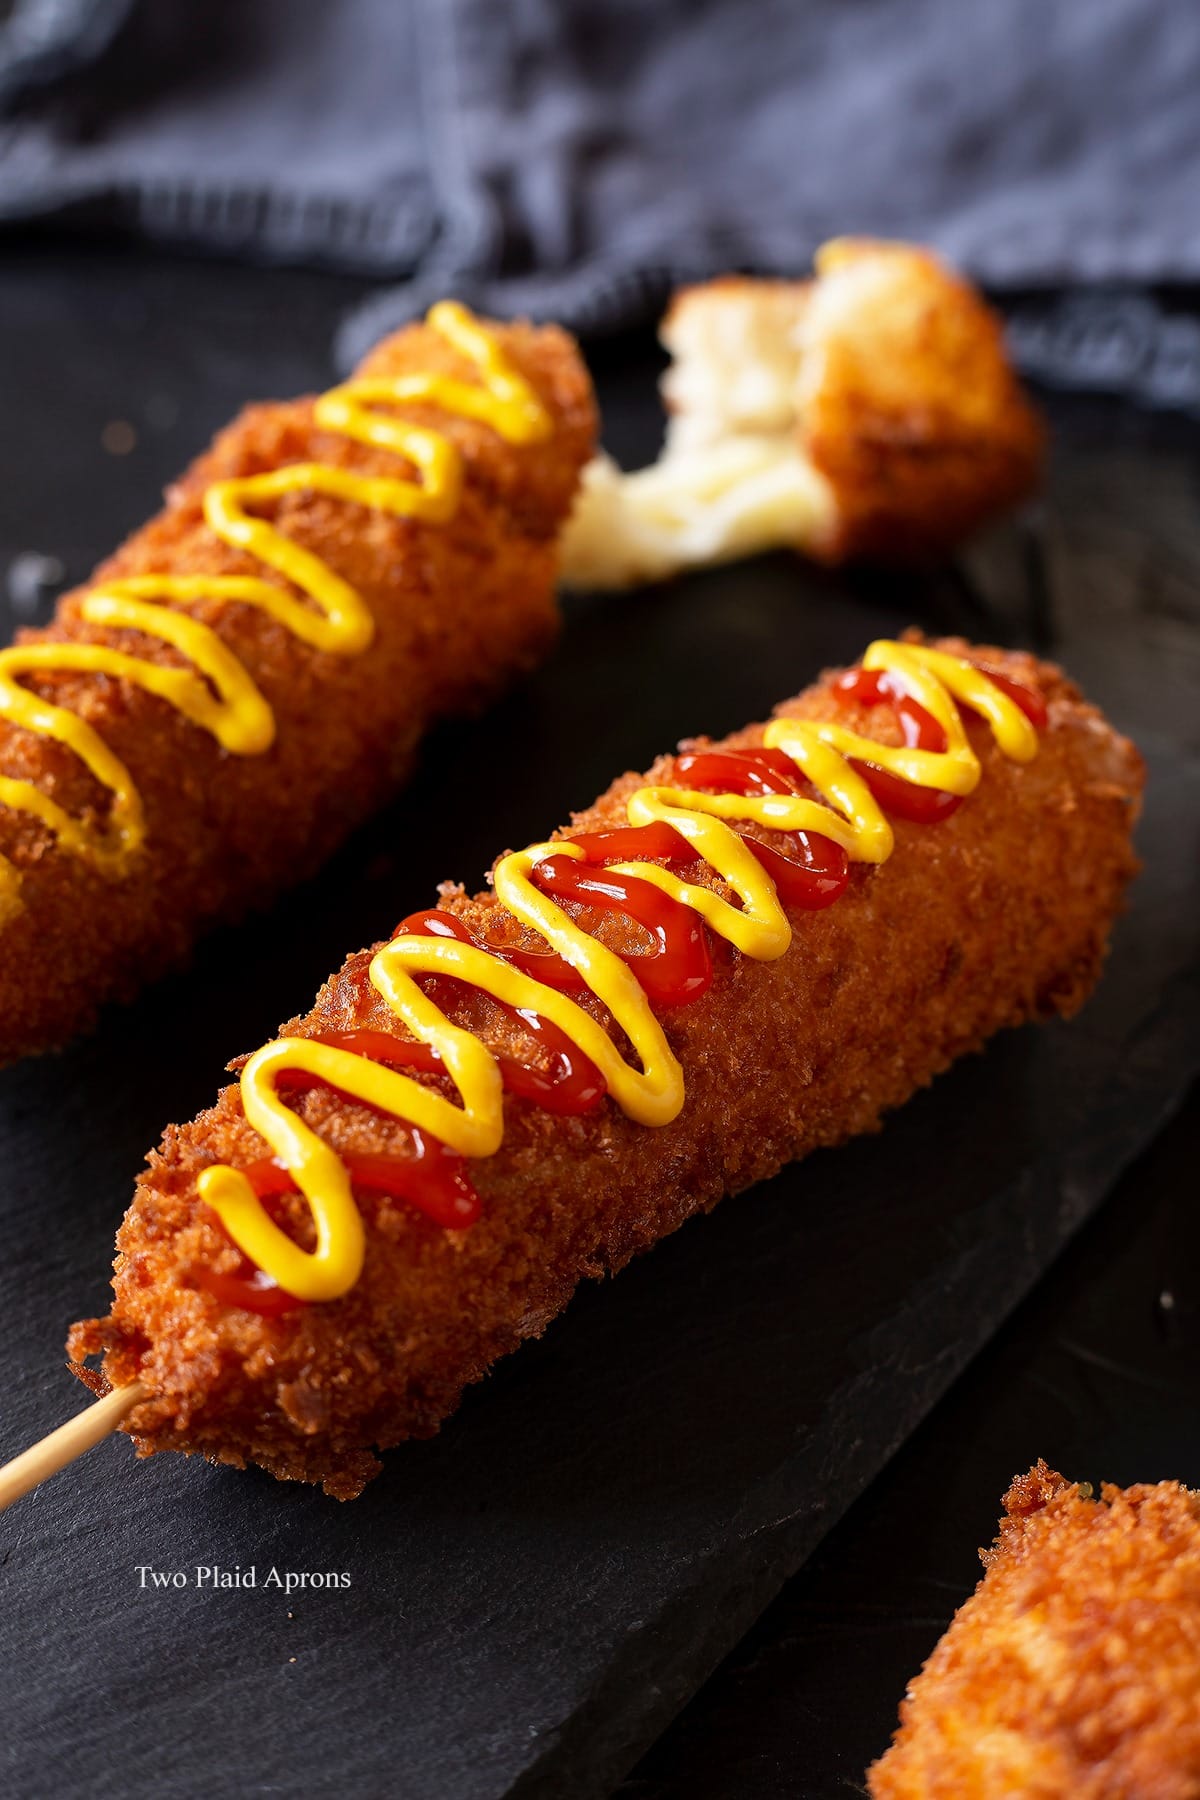 Side view of Korean cheese corn dog dressed with ketchup and mustard on a plate.